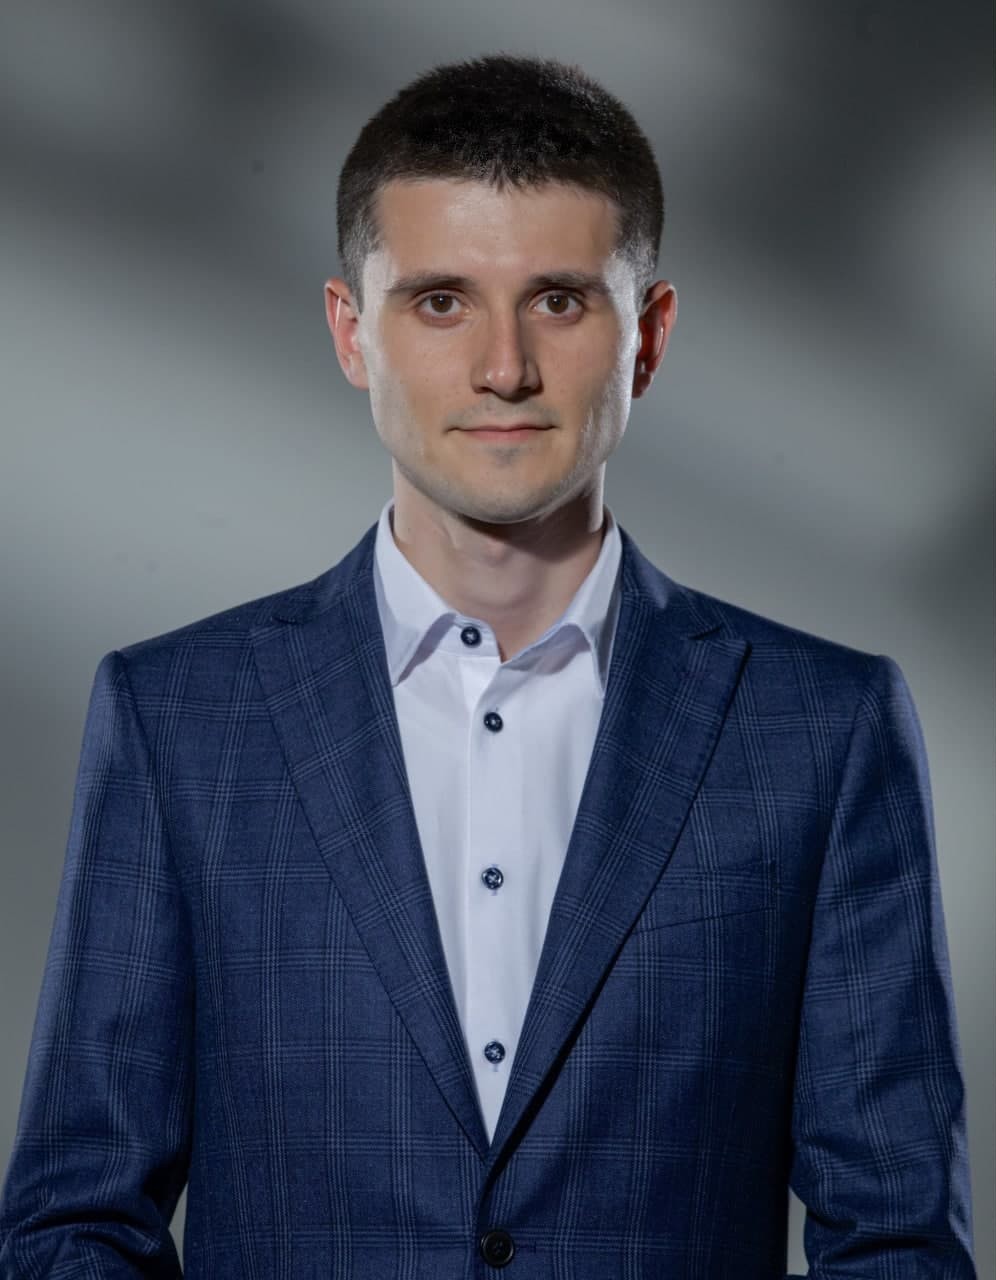 Eugene Litvinov, Attorney-at-Law, Head of Dispute Resolution Department of KPD Consulting Law Firm